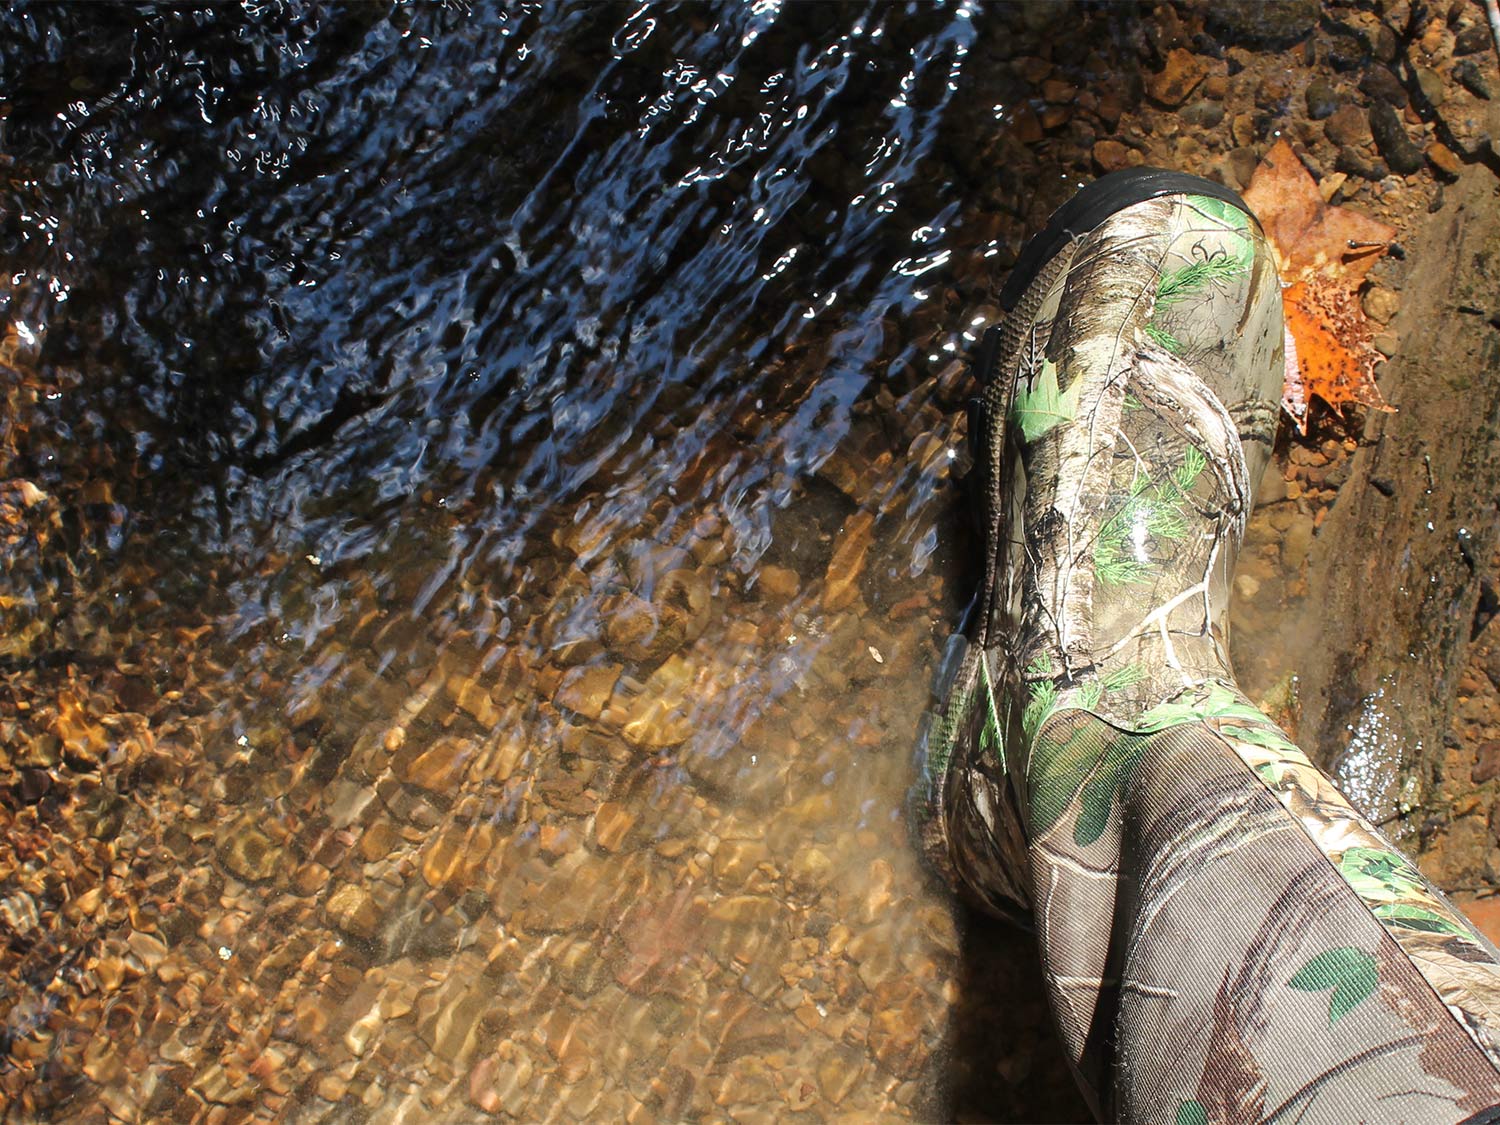 A hunters foot in wading boots is next to water.